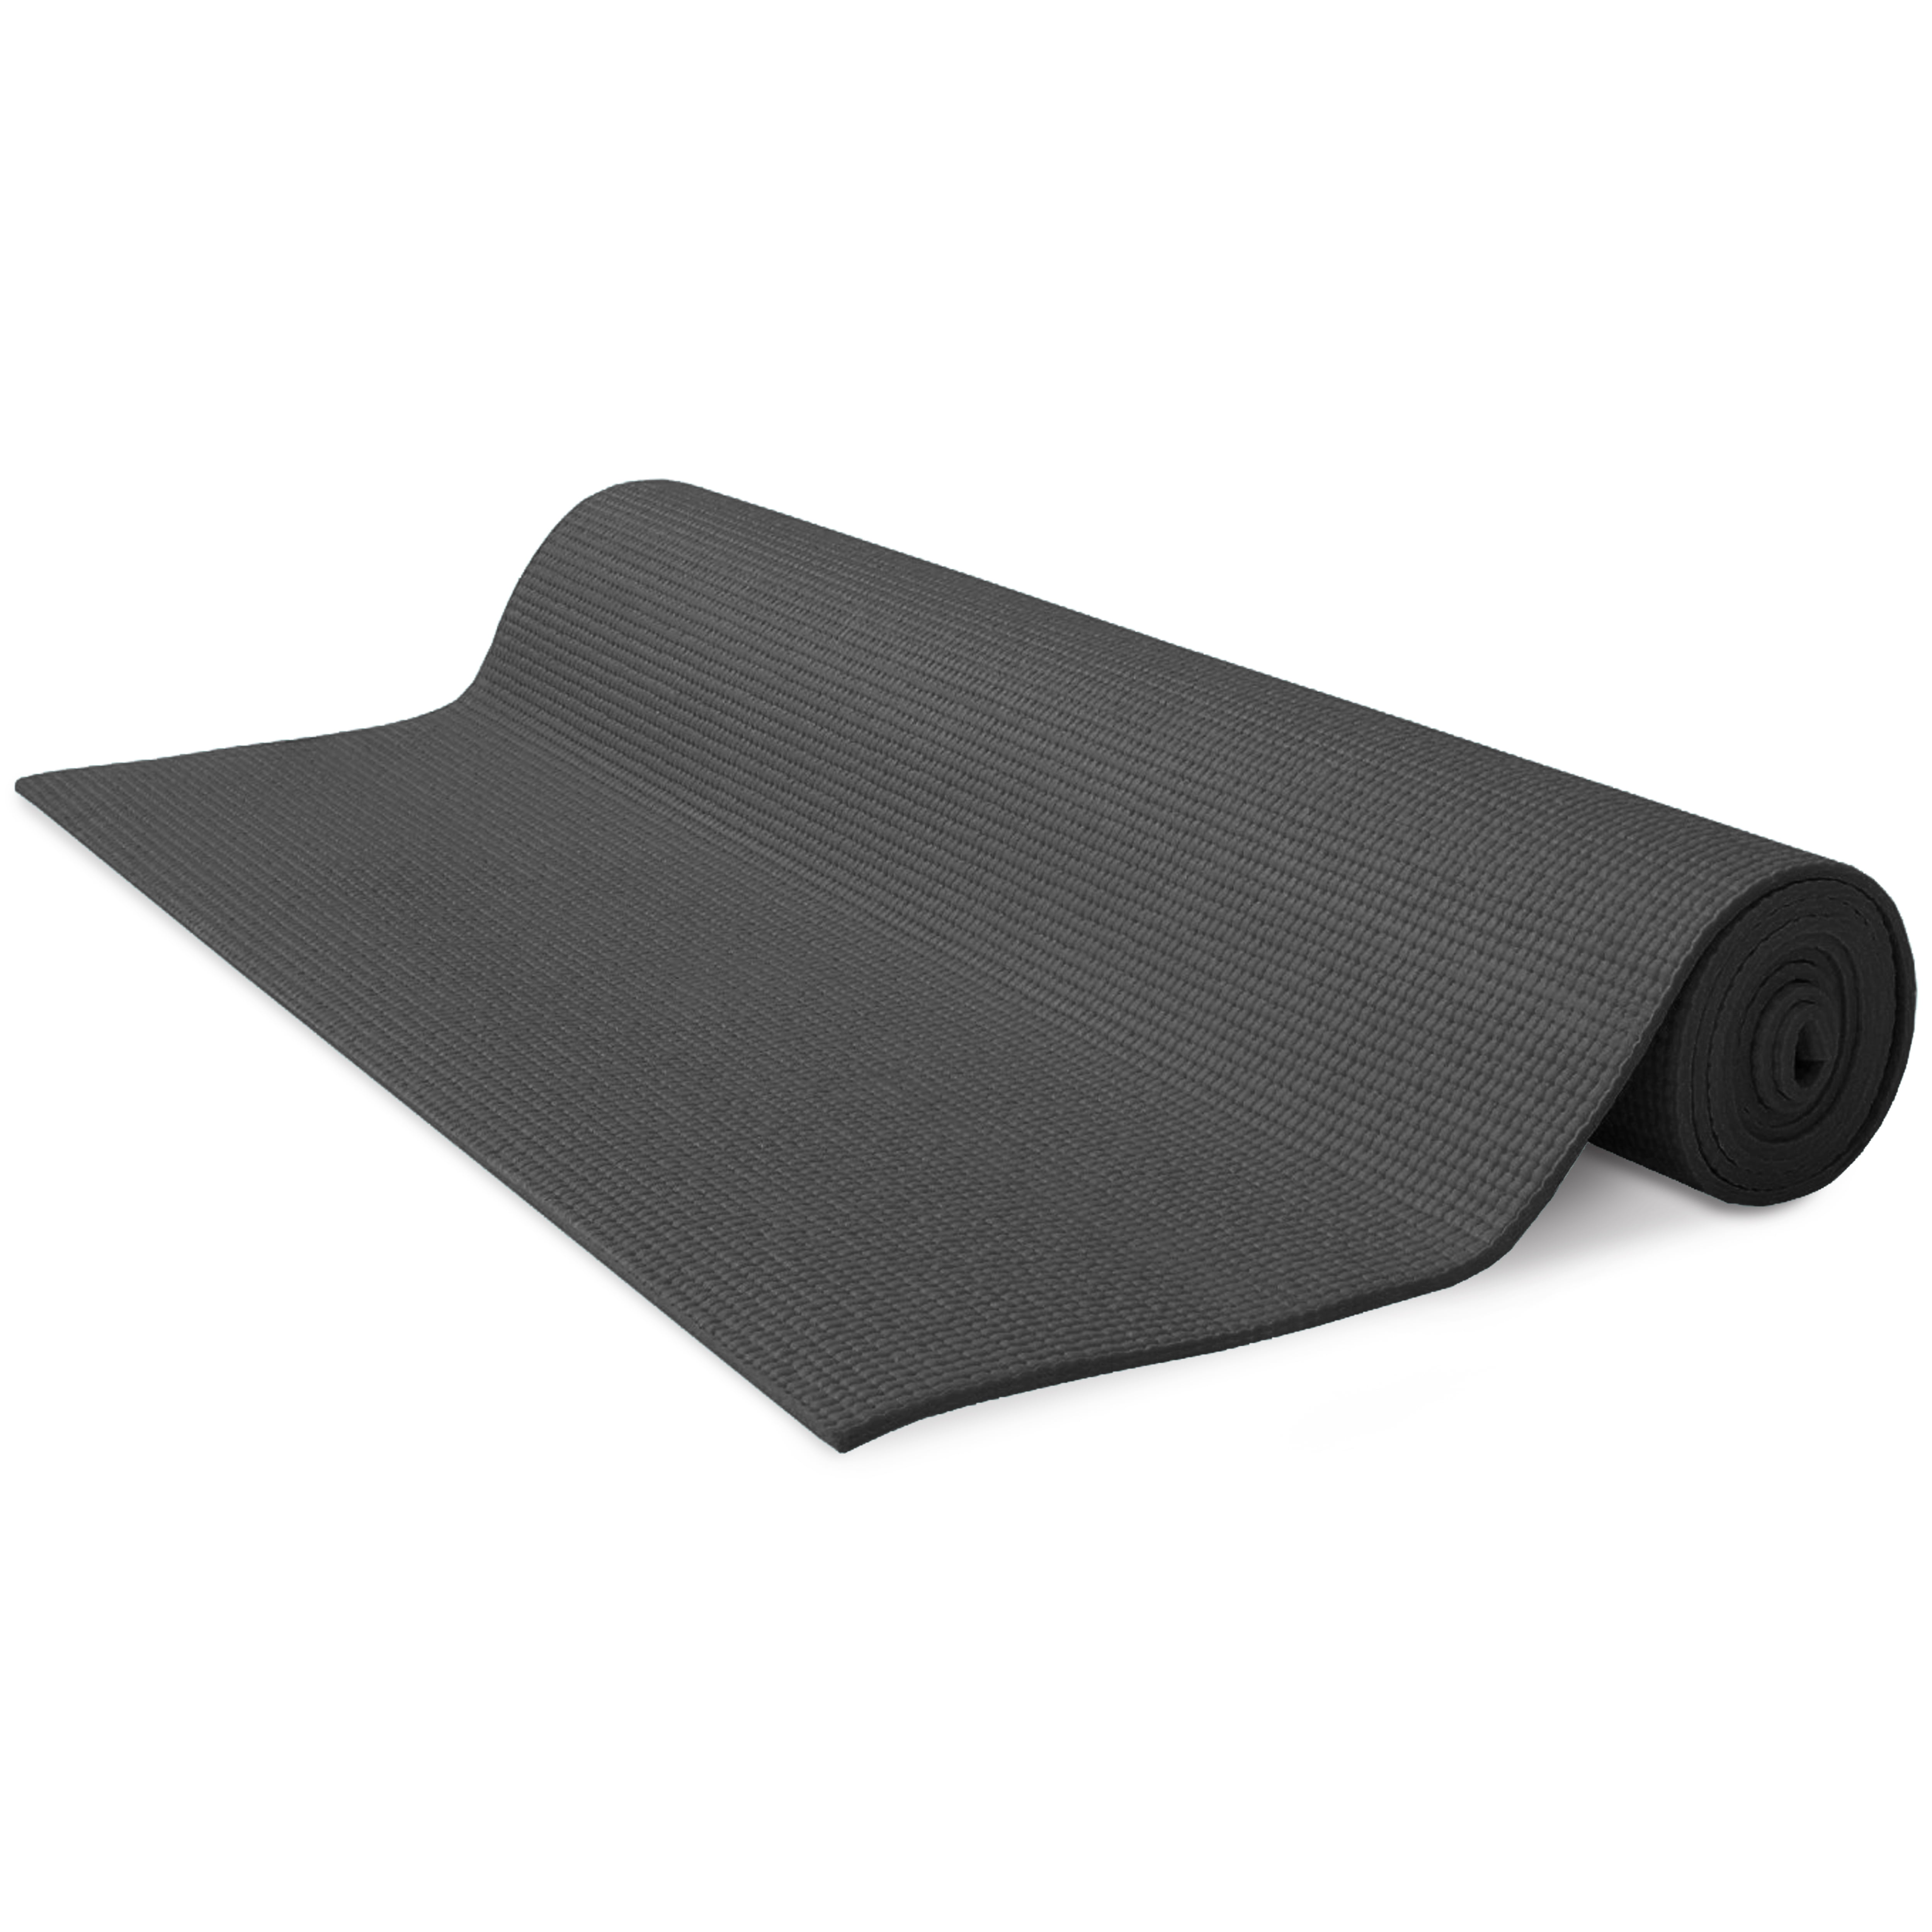 Bean Products Kid Size Yoga Mat 1/8 Thick SGS Certified 24 Wide Premium Quality Non-Toxic No Phthalates or Latex 60 Long Non-Skid 